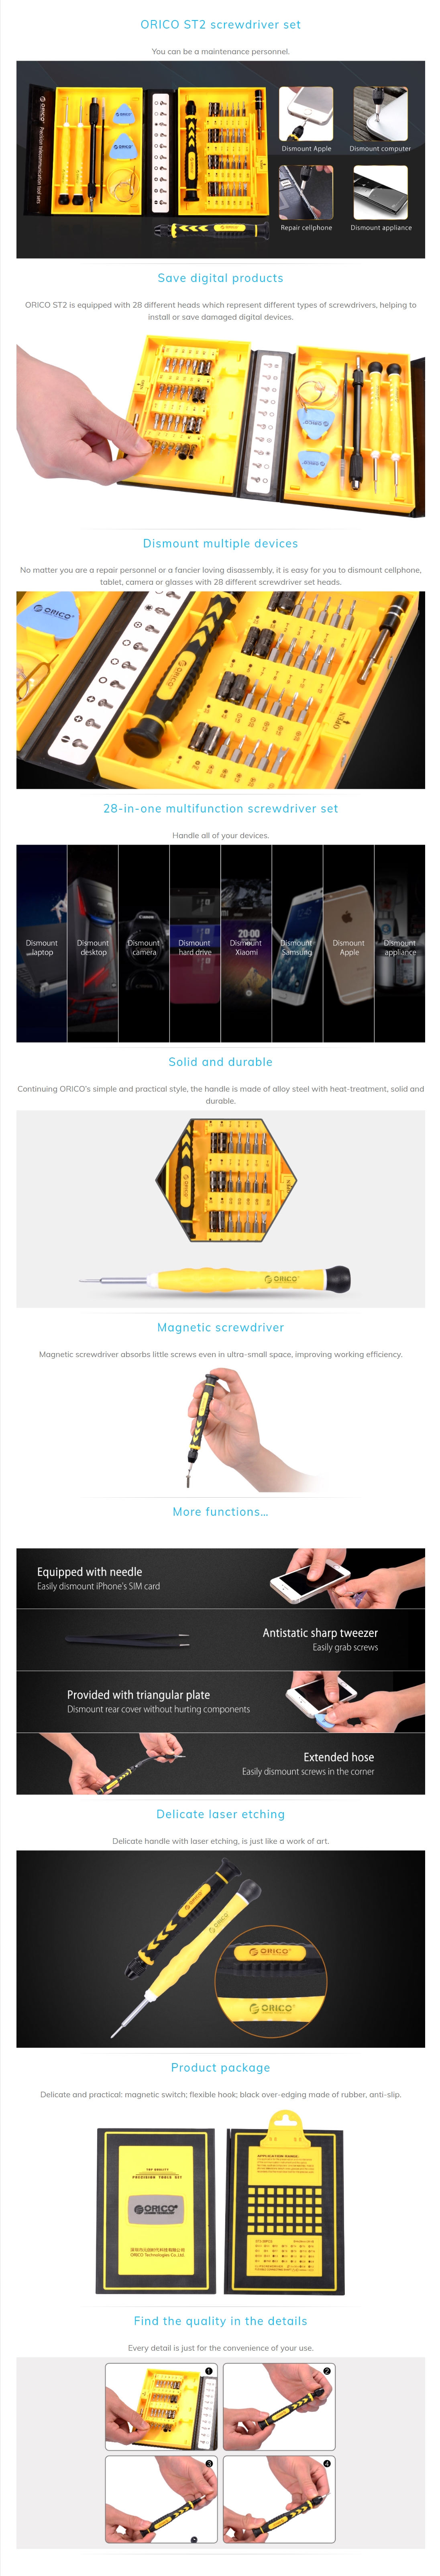 A large marketing image providing additional information about the product ORICO ST2 BK Screwdriver Set - Additional alt info not provided